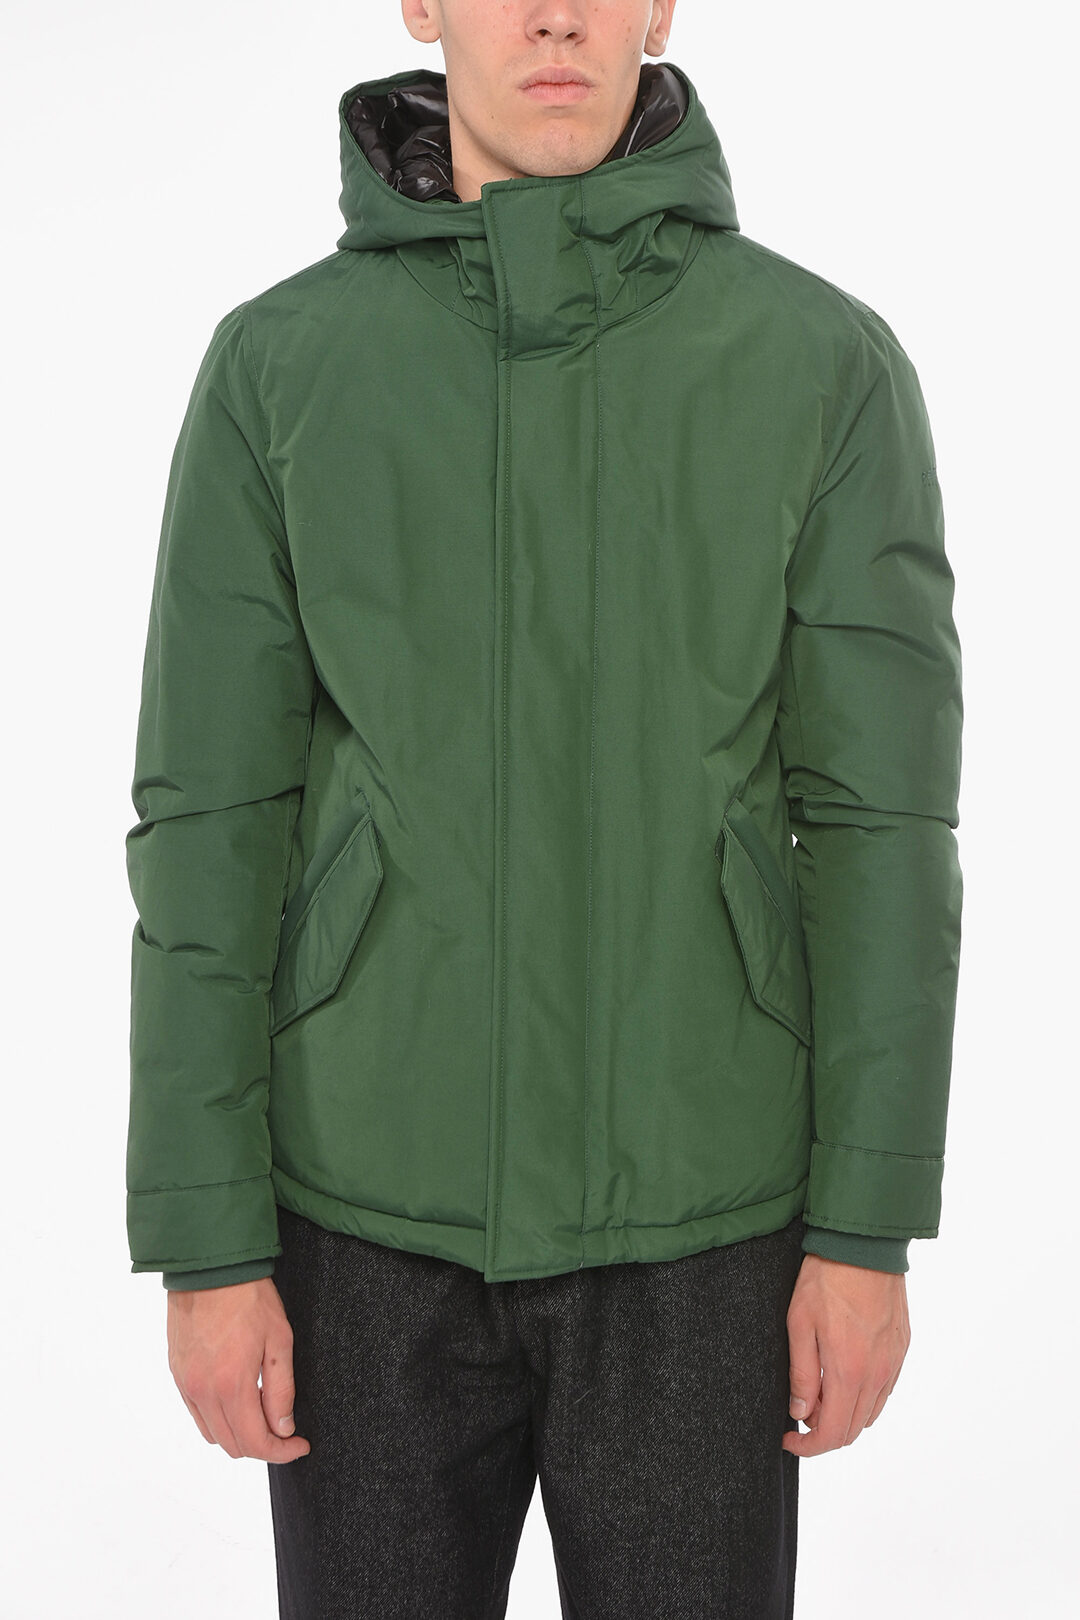 Woolrich PENN-RICH Padded Crop Parka with Hood men - Glamood Outlet